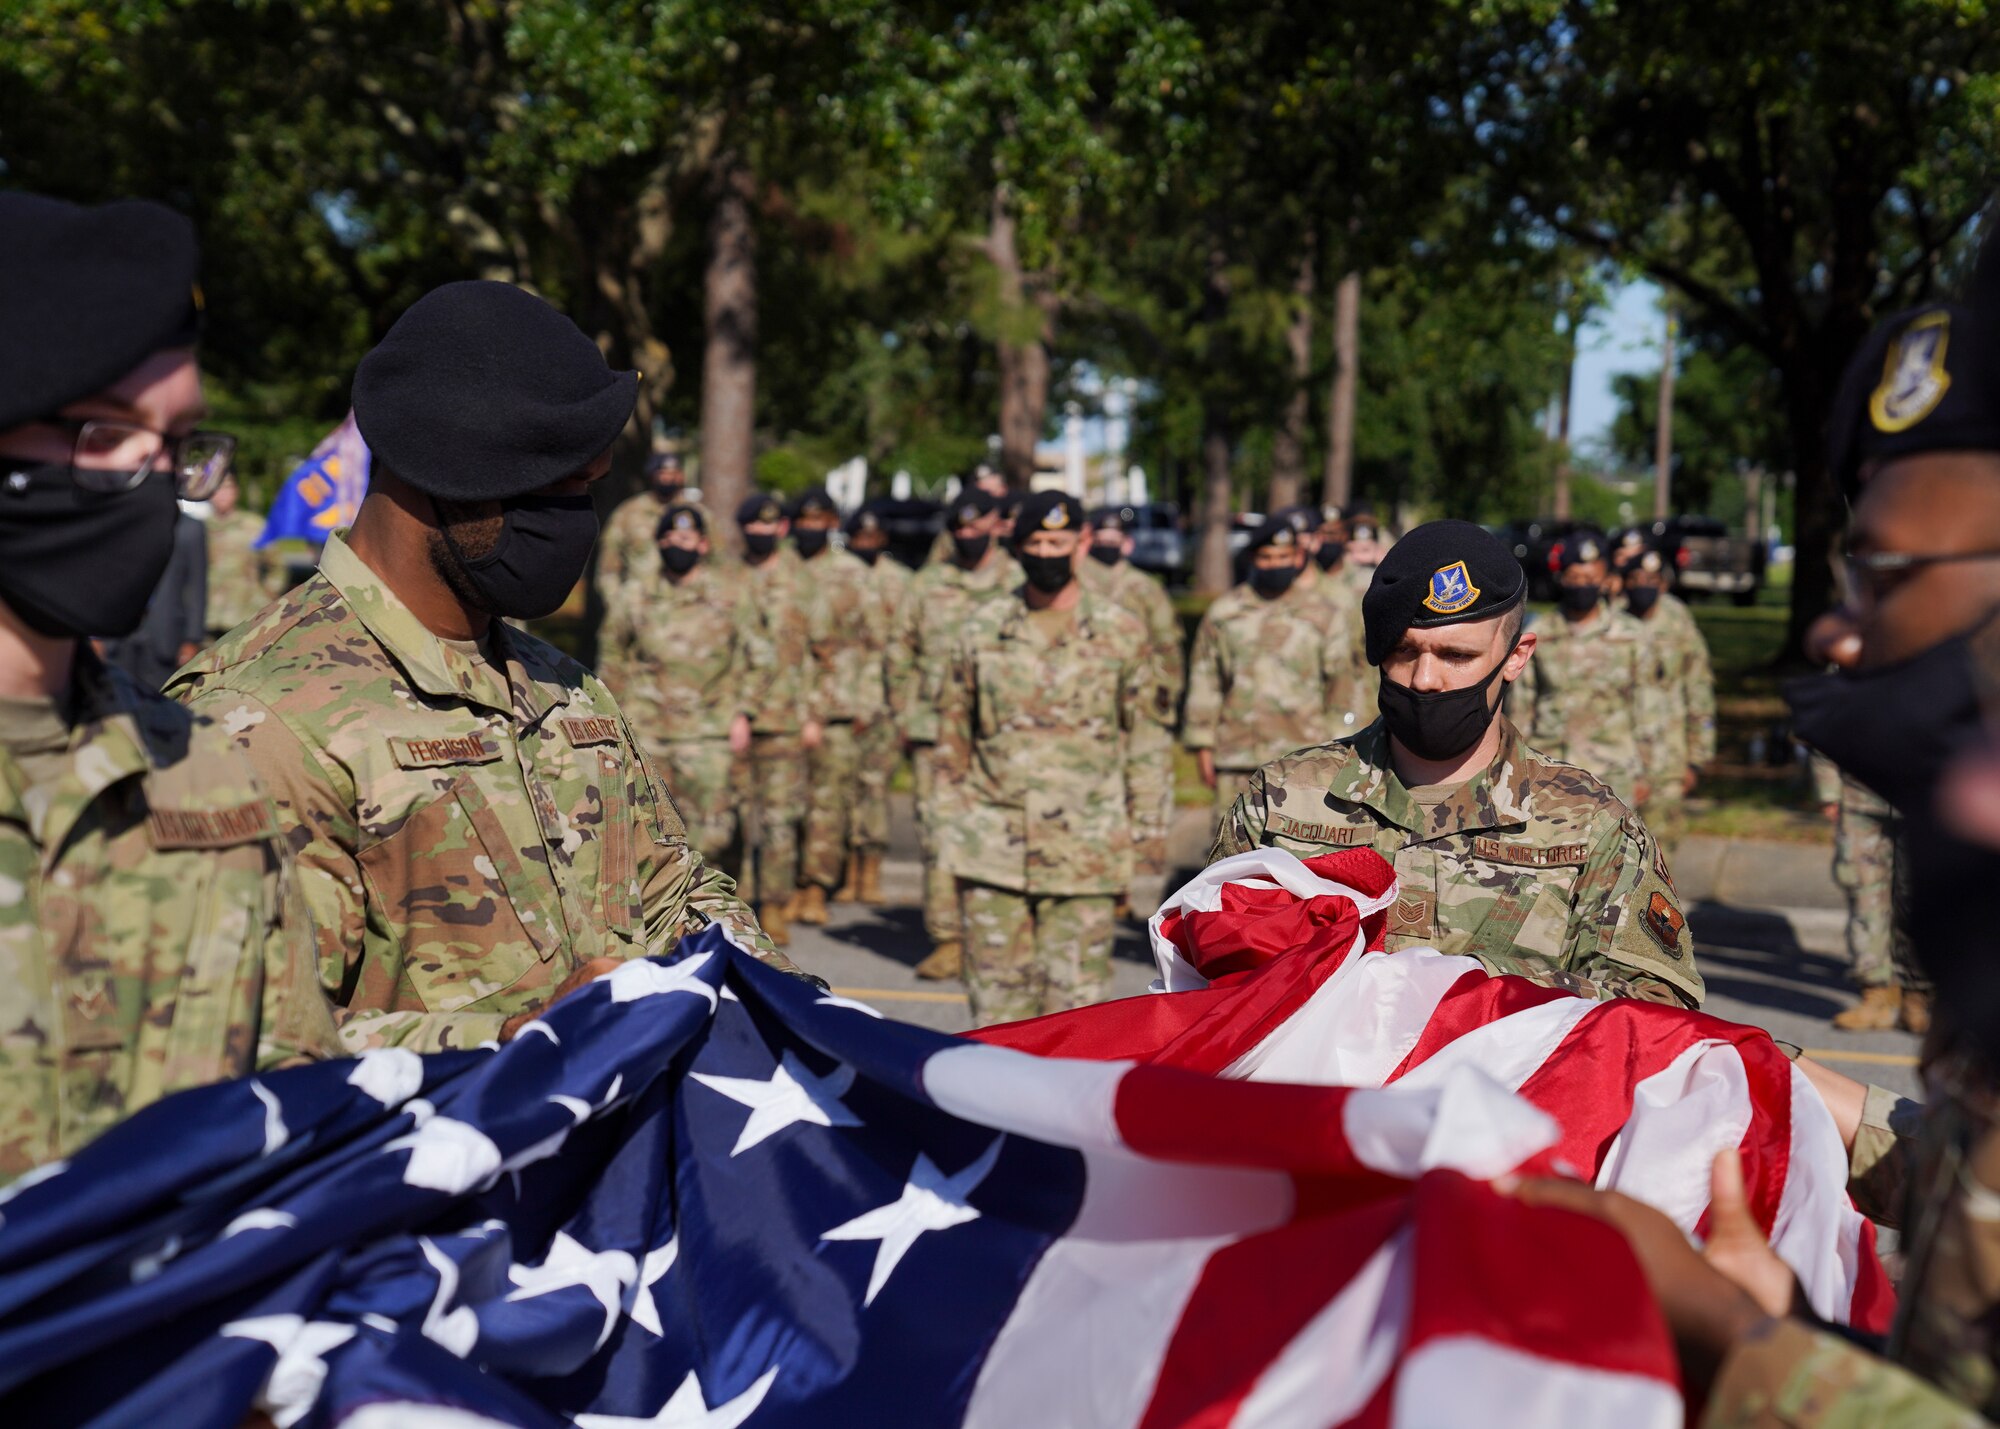 Airmen from the 81st Security Forces Squadron, fold the U.S. flag during the Police Week retreat ceremony at Keesler Air Force Base, Mississippi, May 14, 2021. The event was held during National Police Week, recognizing the men and women in law enforcement. (U.S. Air Force photo by Senior Airman Spencer Tobler)